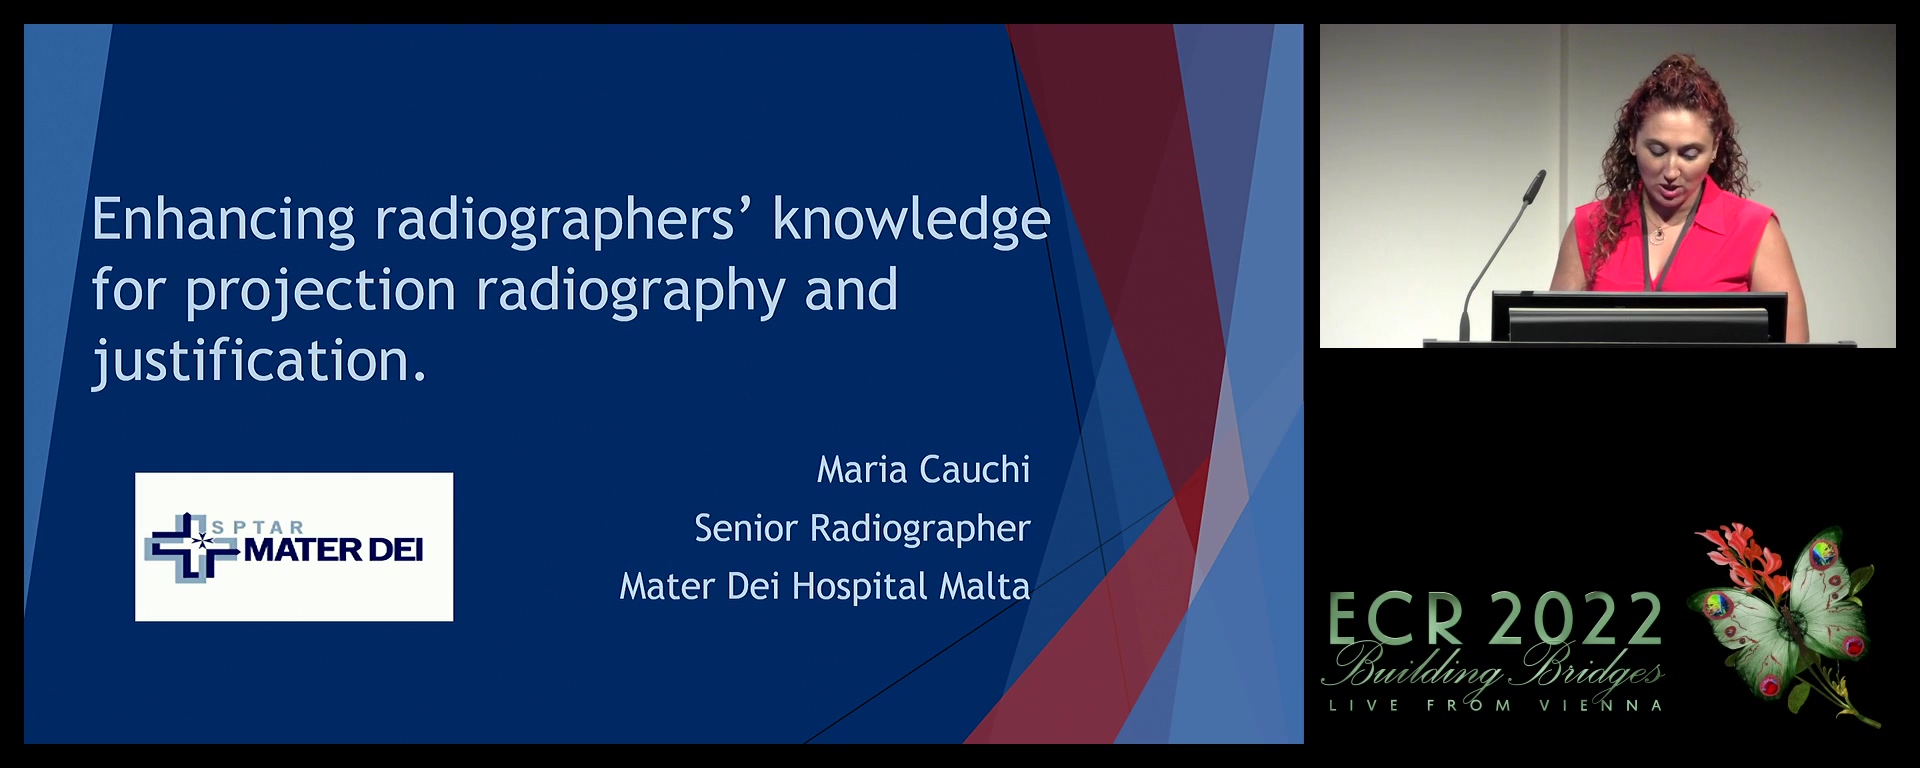 Enhancing radiographers' knowledge for projection radiography justification